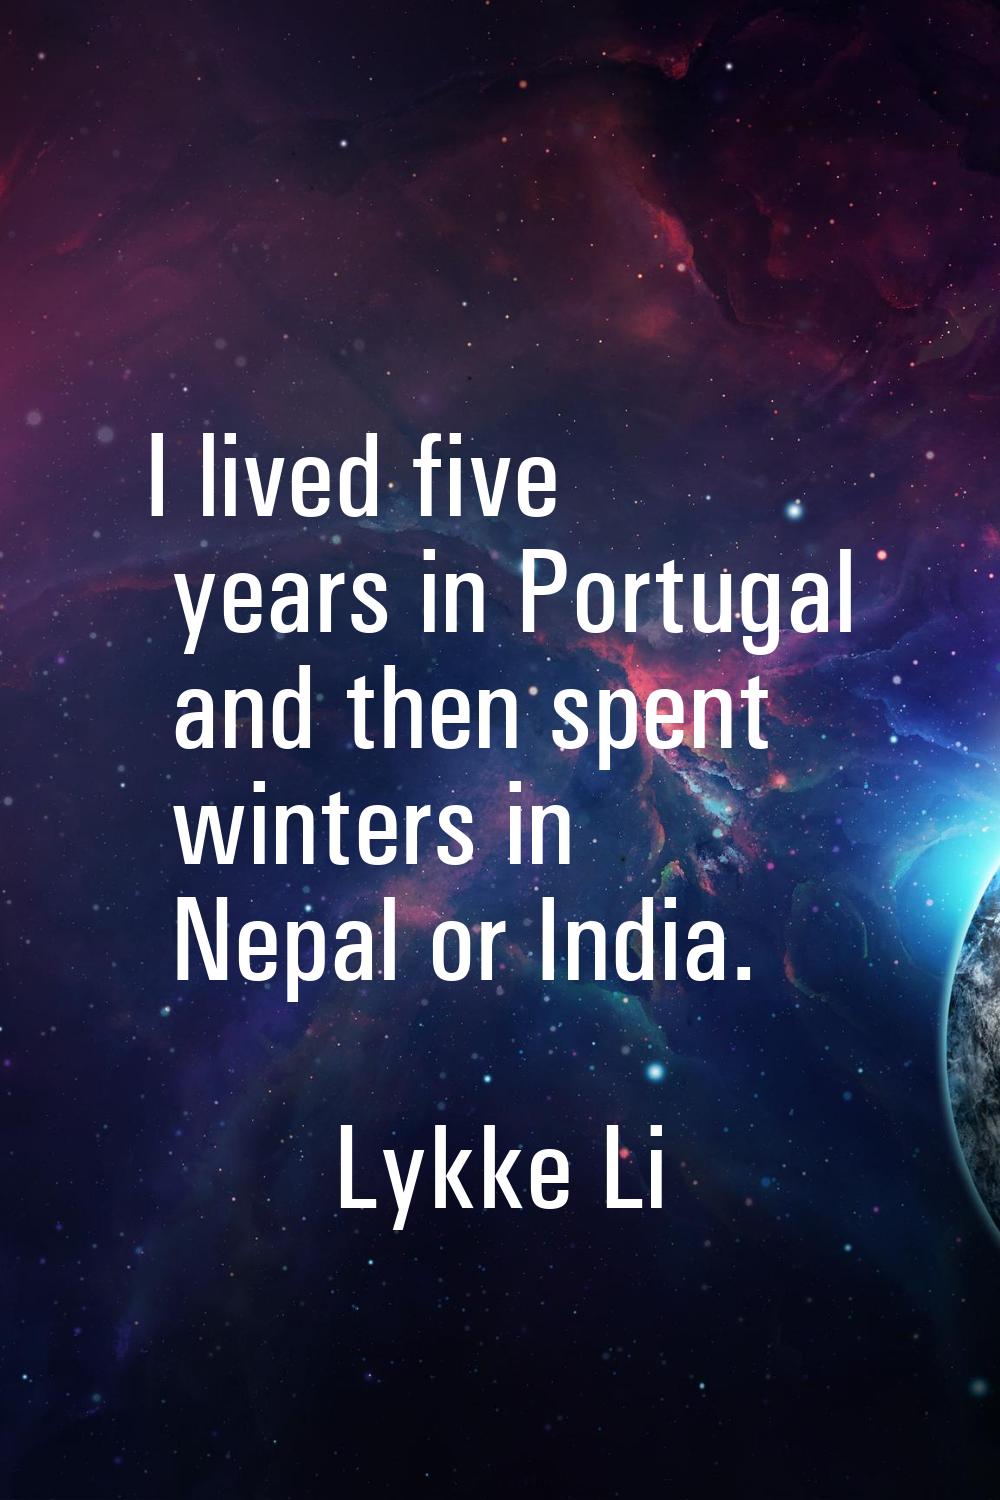 I lived five years in Portugal and then spent winters in Nepal or India.